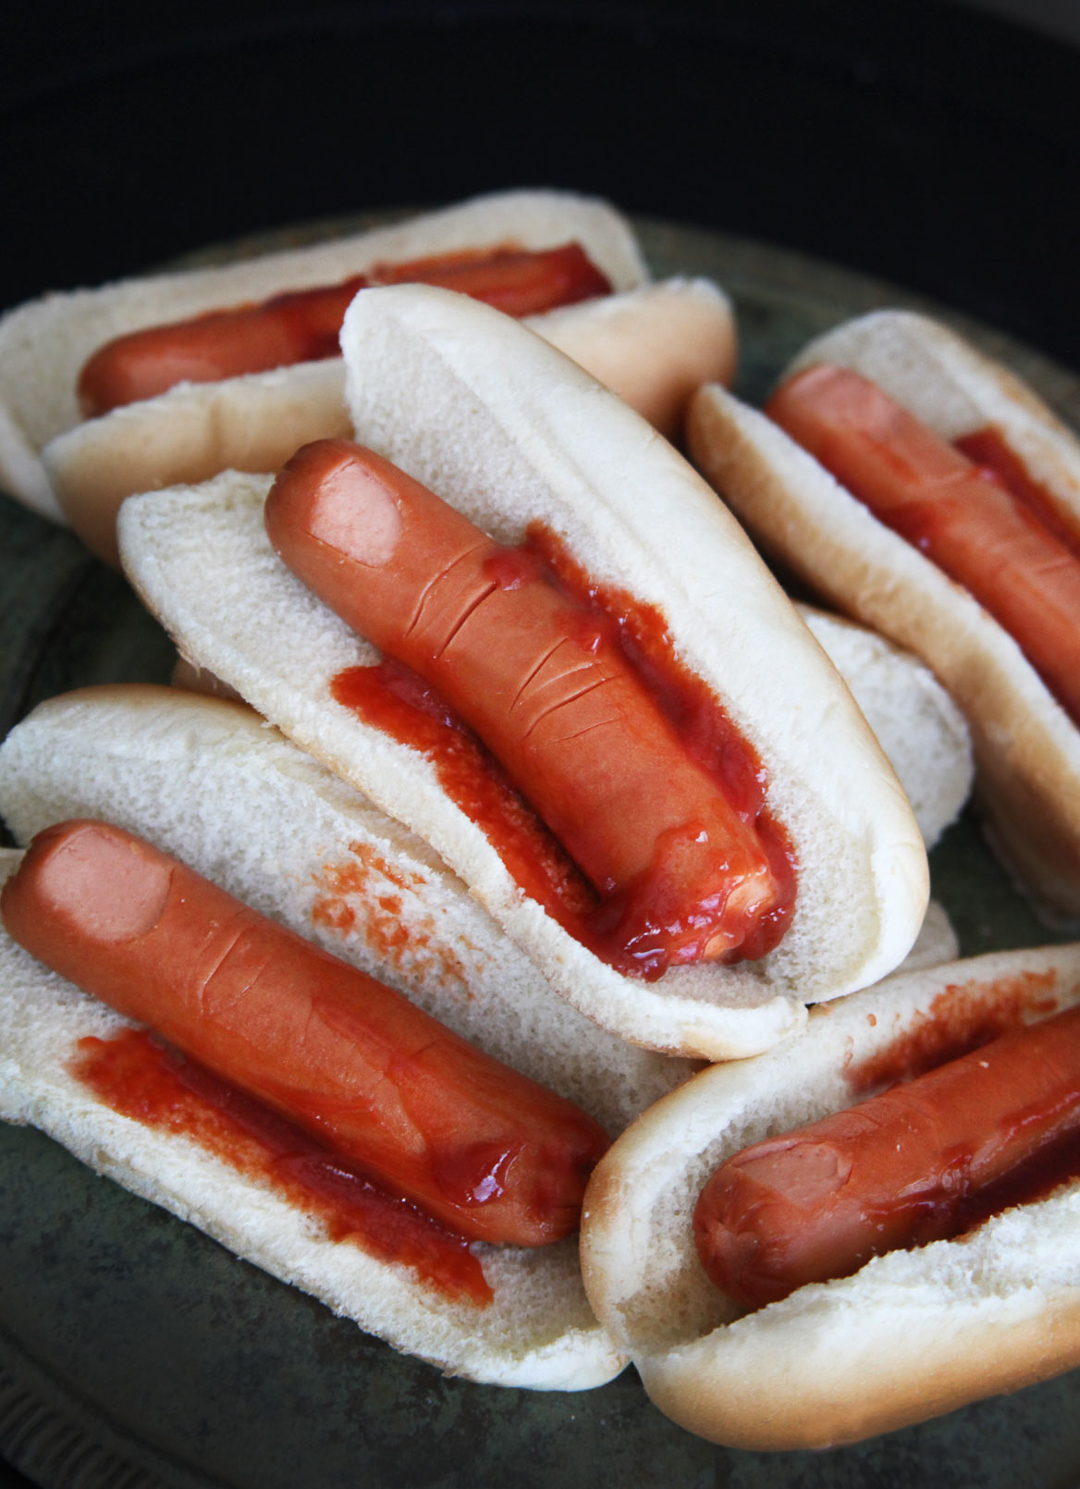 The scariest Halloween treat: bloody fingers are hotdogs in a bun with ketchup.